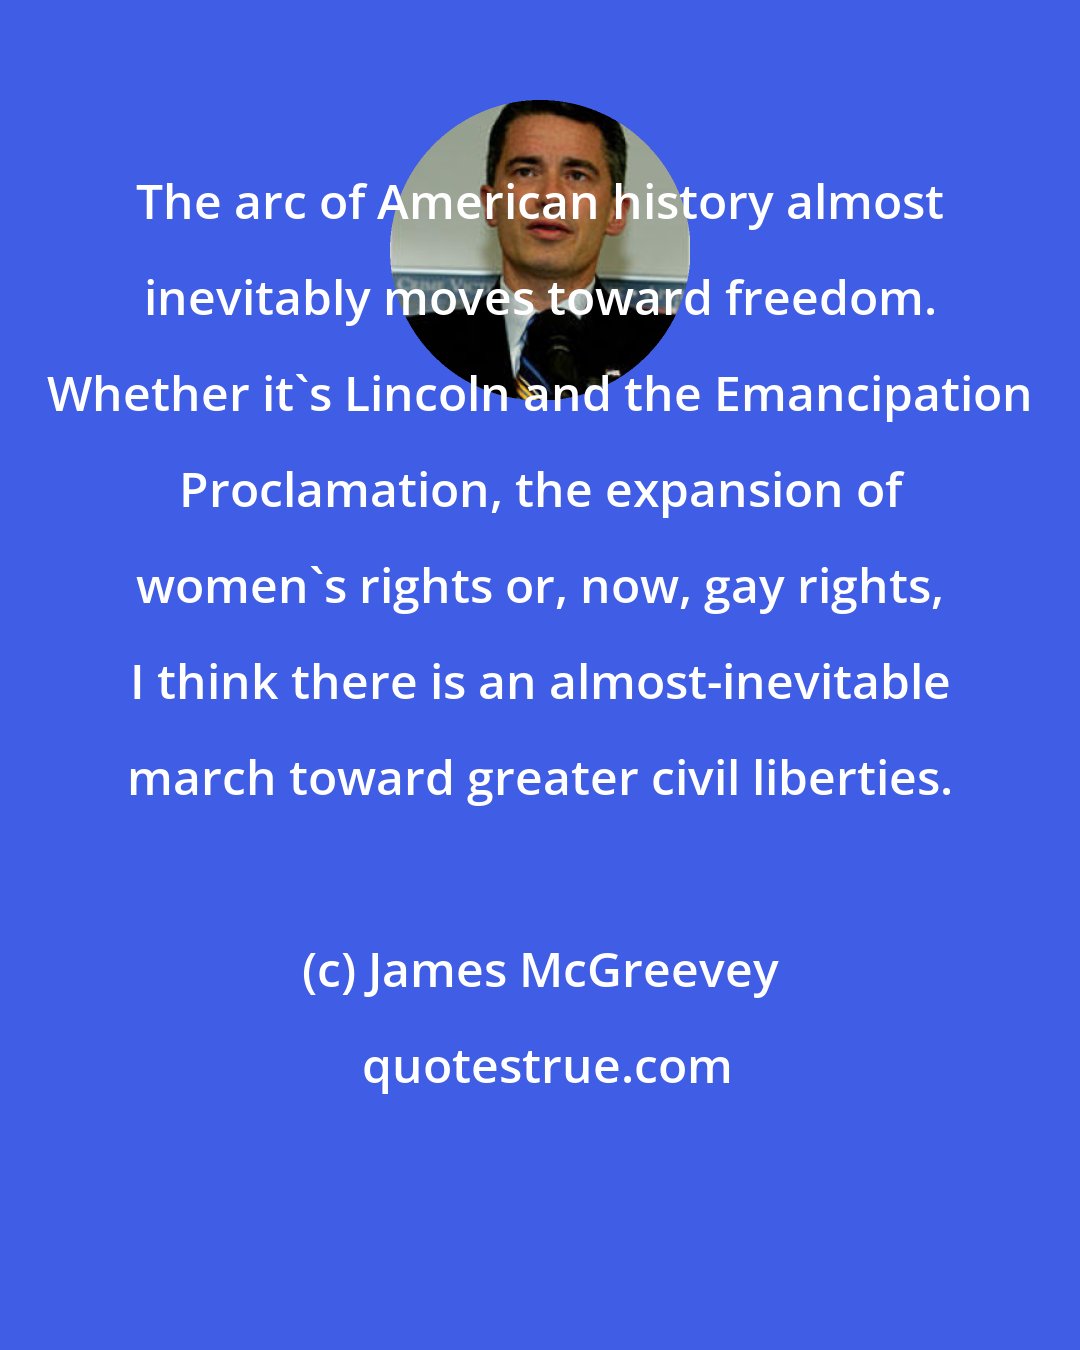 James McGreevey: The arc of American history almost inevitably moves toward freedom. Whether it's Lincoln and the Emancipation Proclamation, the expansion of women's rights or, now, gay rights, I think there is an almost-inevitable march toward greater civil liberties.